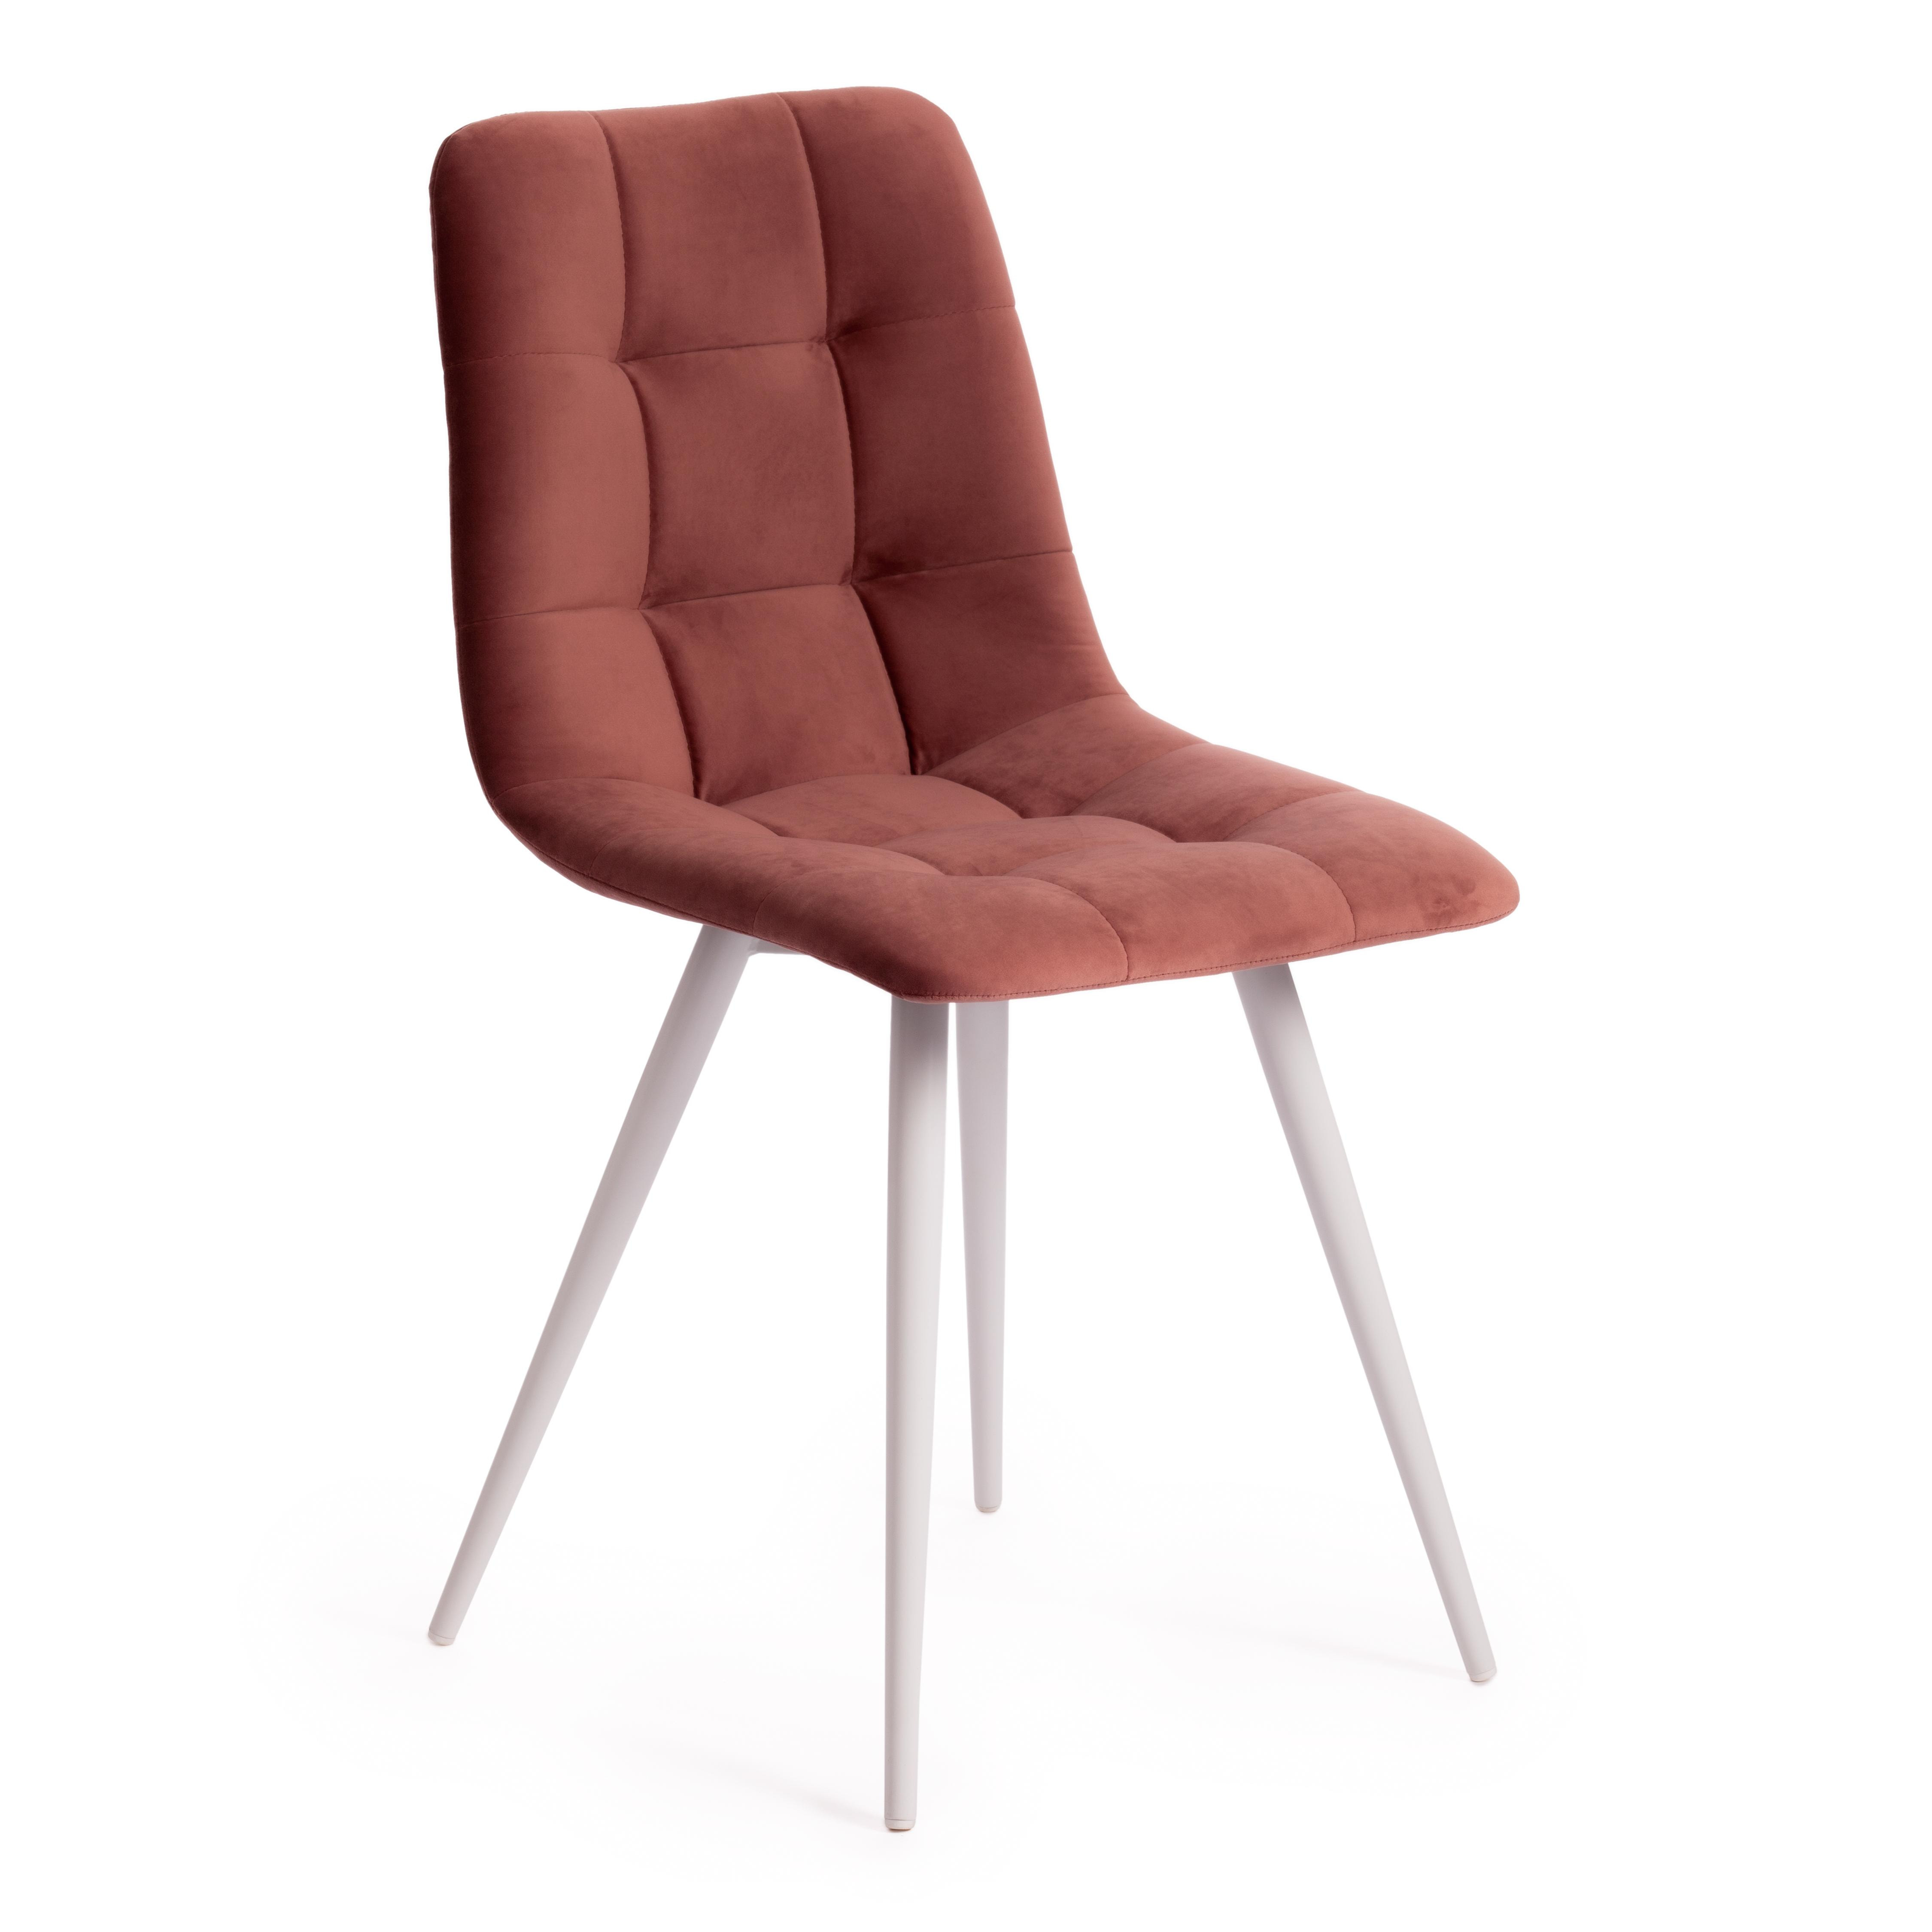  TetChair Chilly 7095-1 coral barkhat,  